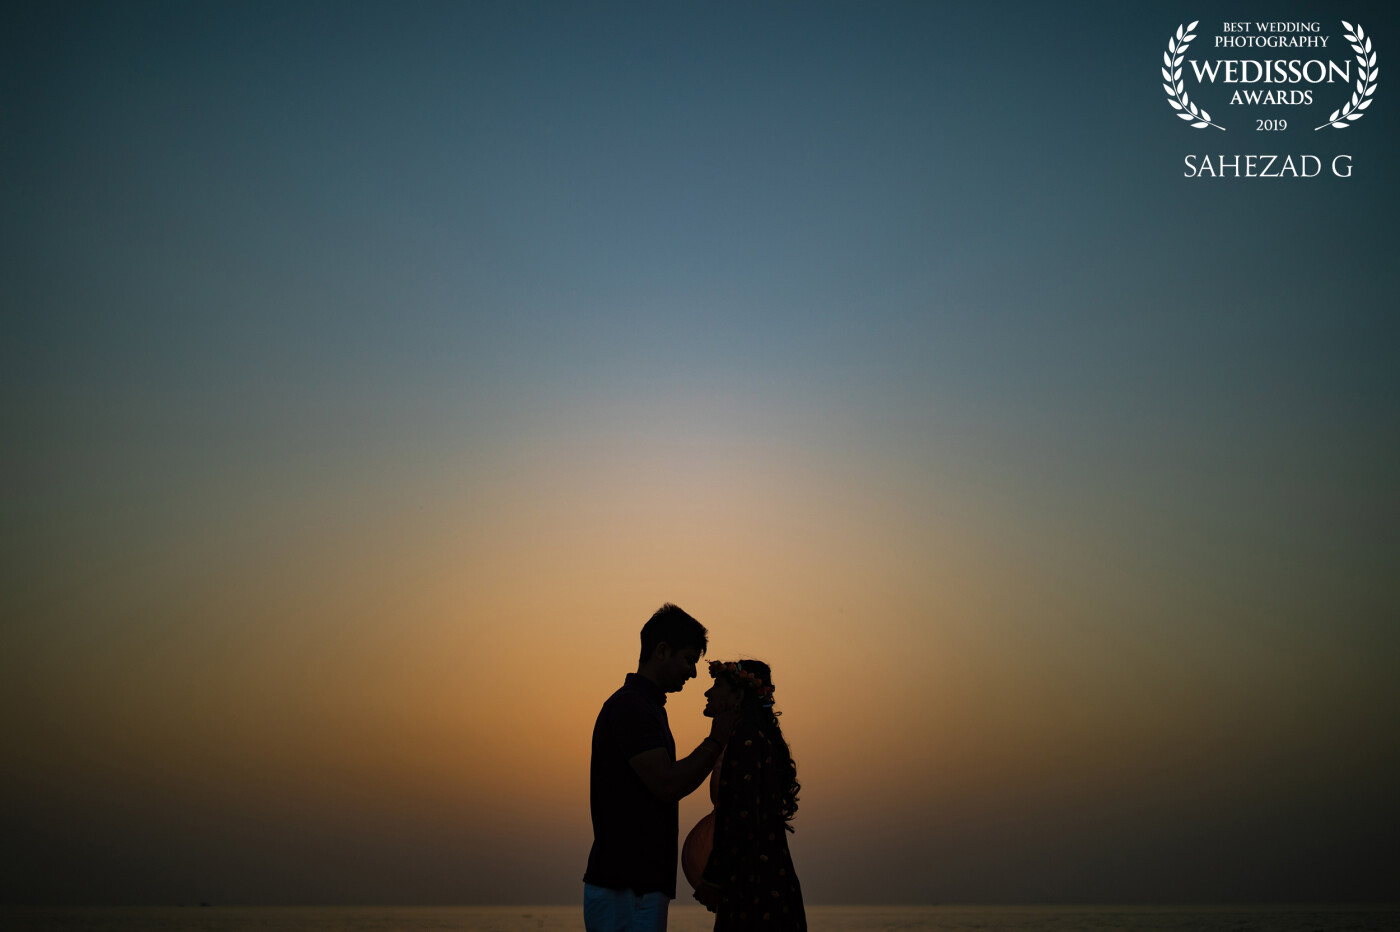 We were at the Suhali beach capturing couple first maternity shoot Ravi & Garima. This was the second shoot with the couple after their wedding photography.<br />
The couple was tired and ask for pack up, as we were shooting the third session of the day. Ask them for the last shoot of the day. Just tried to add the combination of pre weeding in a maternity shoot. The sun was ready to set. Used profoto light for the shoot. This is the result.